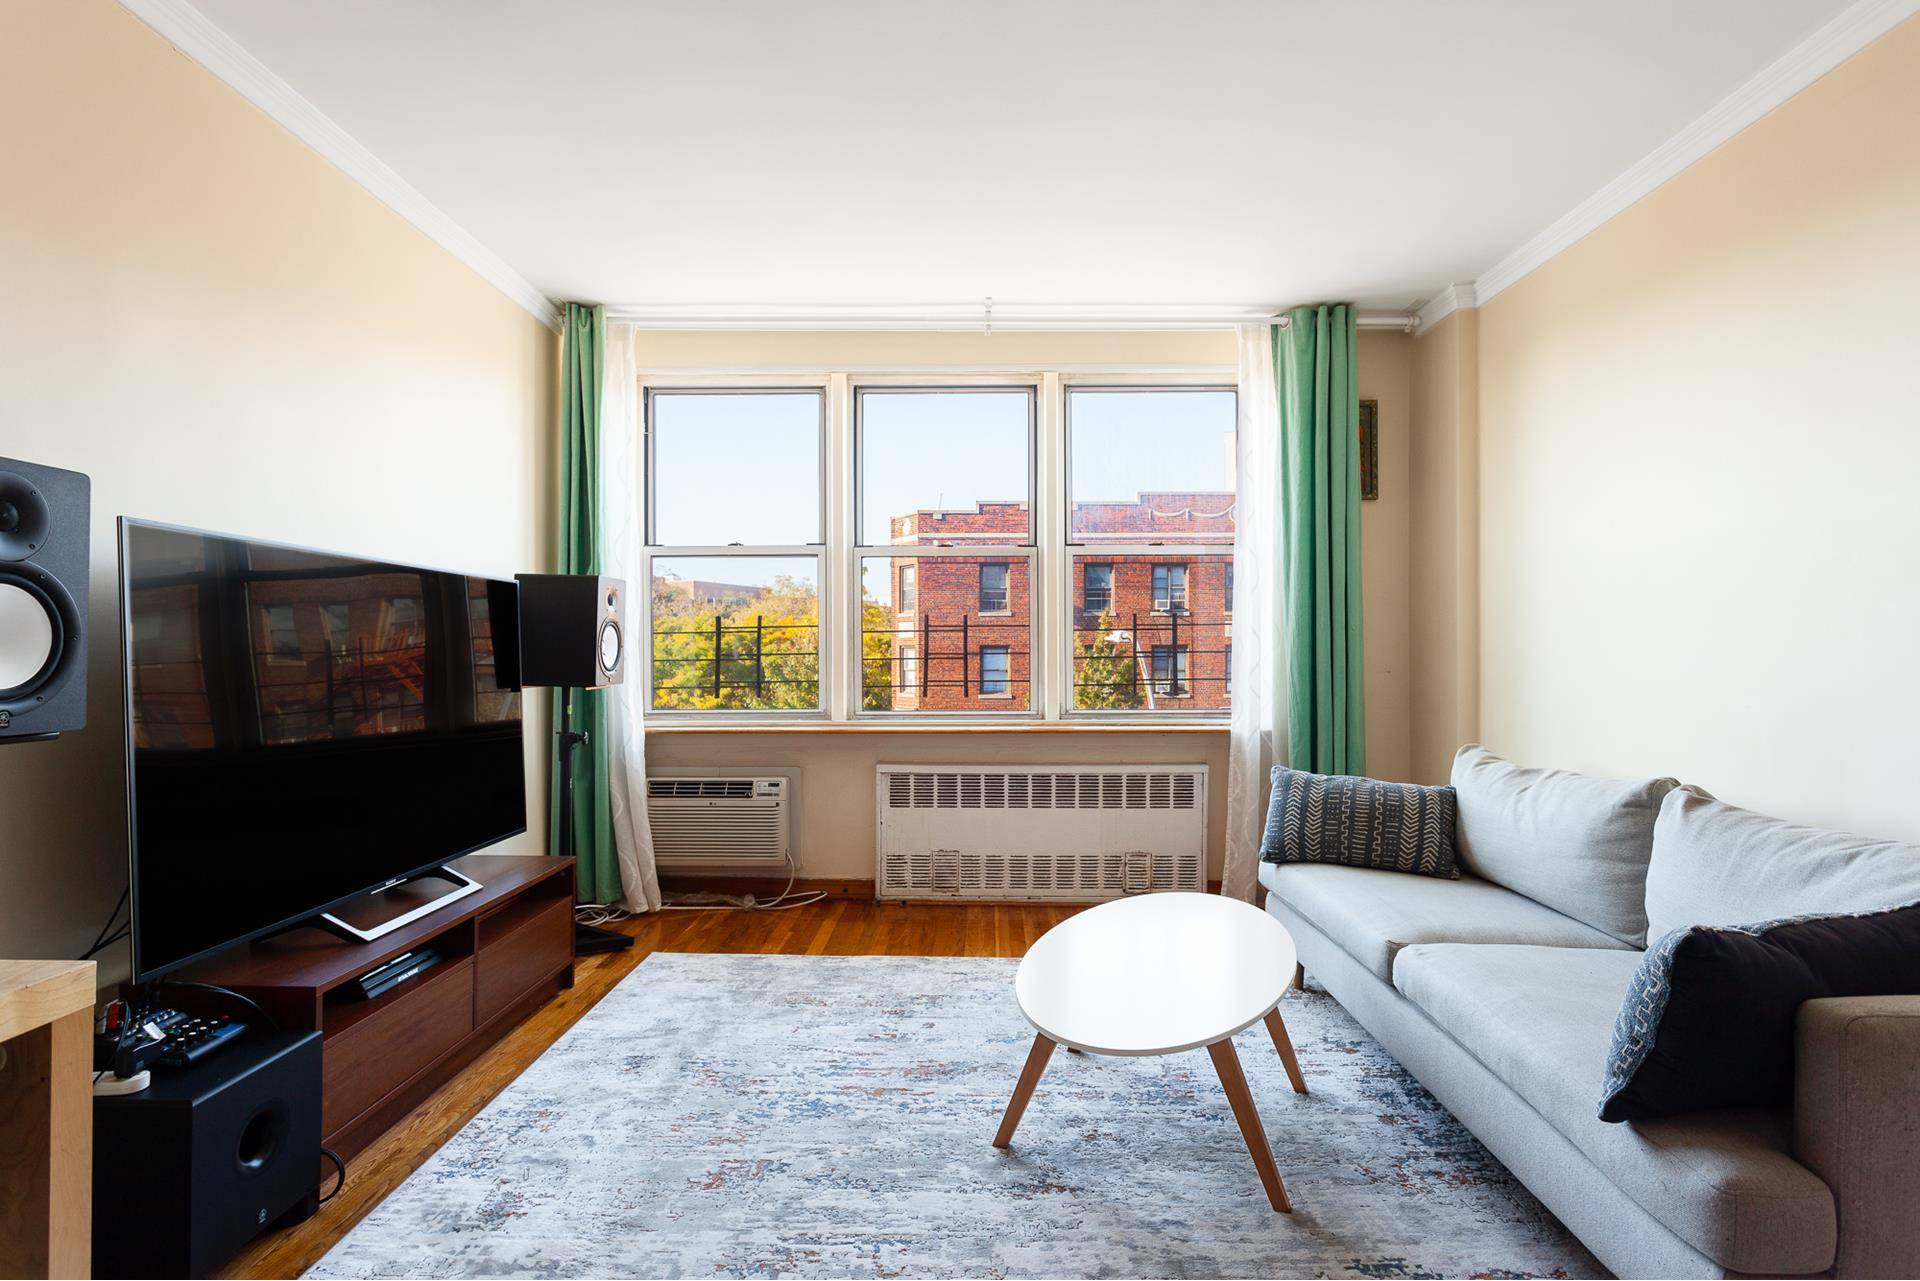 This newly listed apartment is located on the 4th floor of a well maintained Kensington coop.